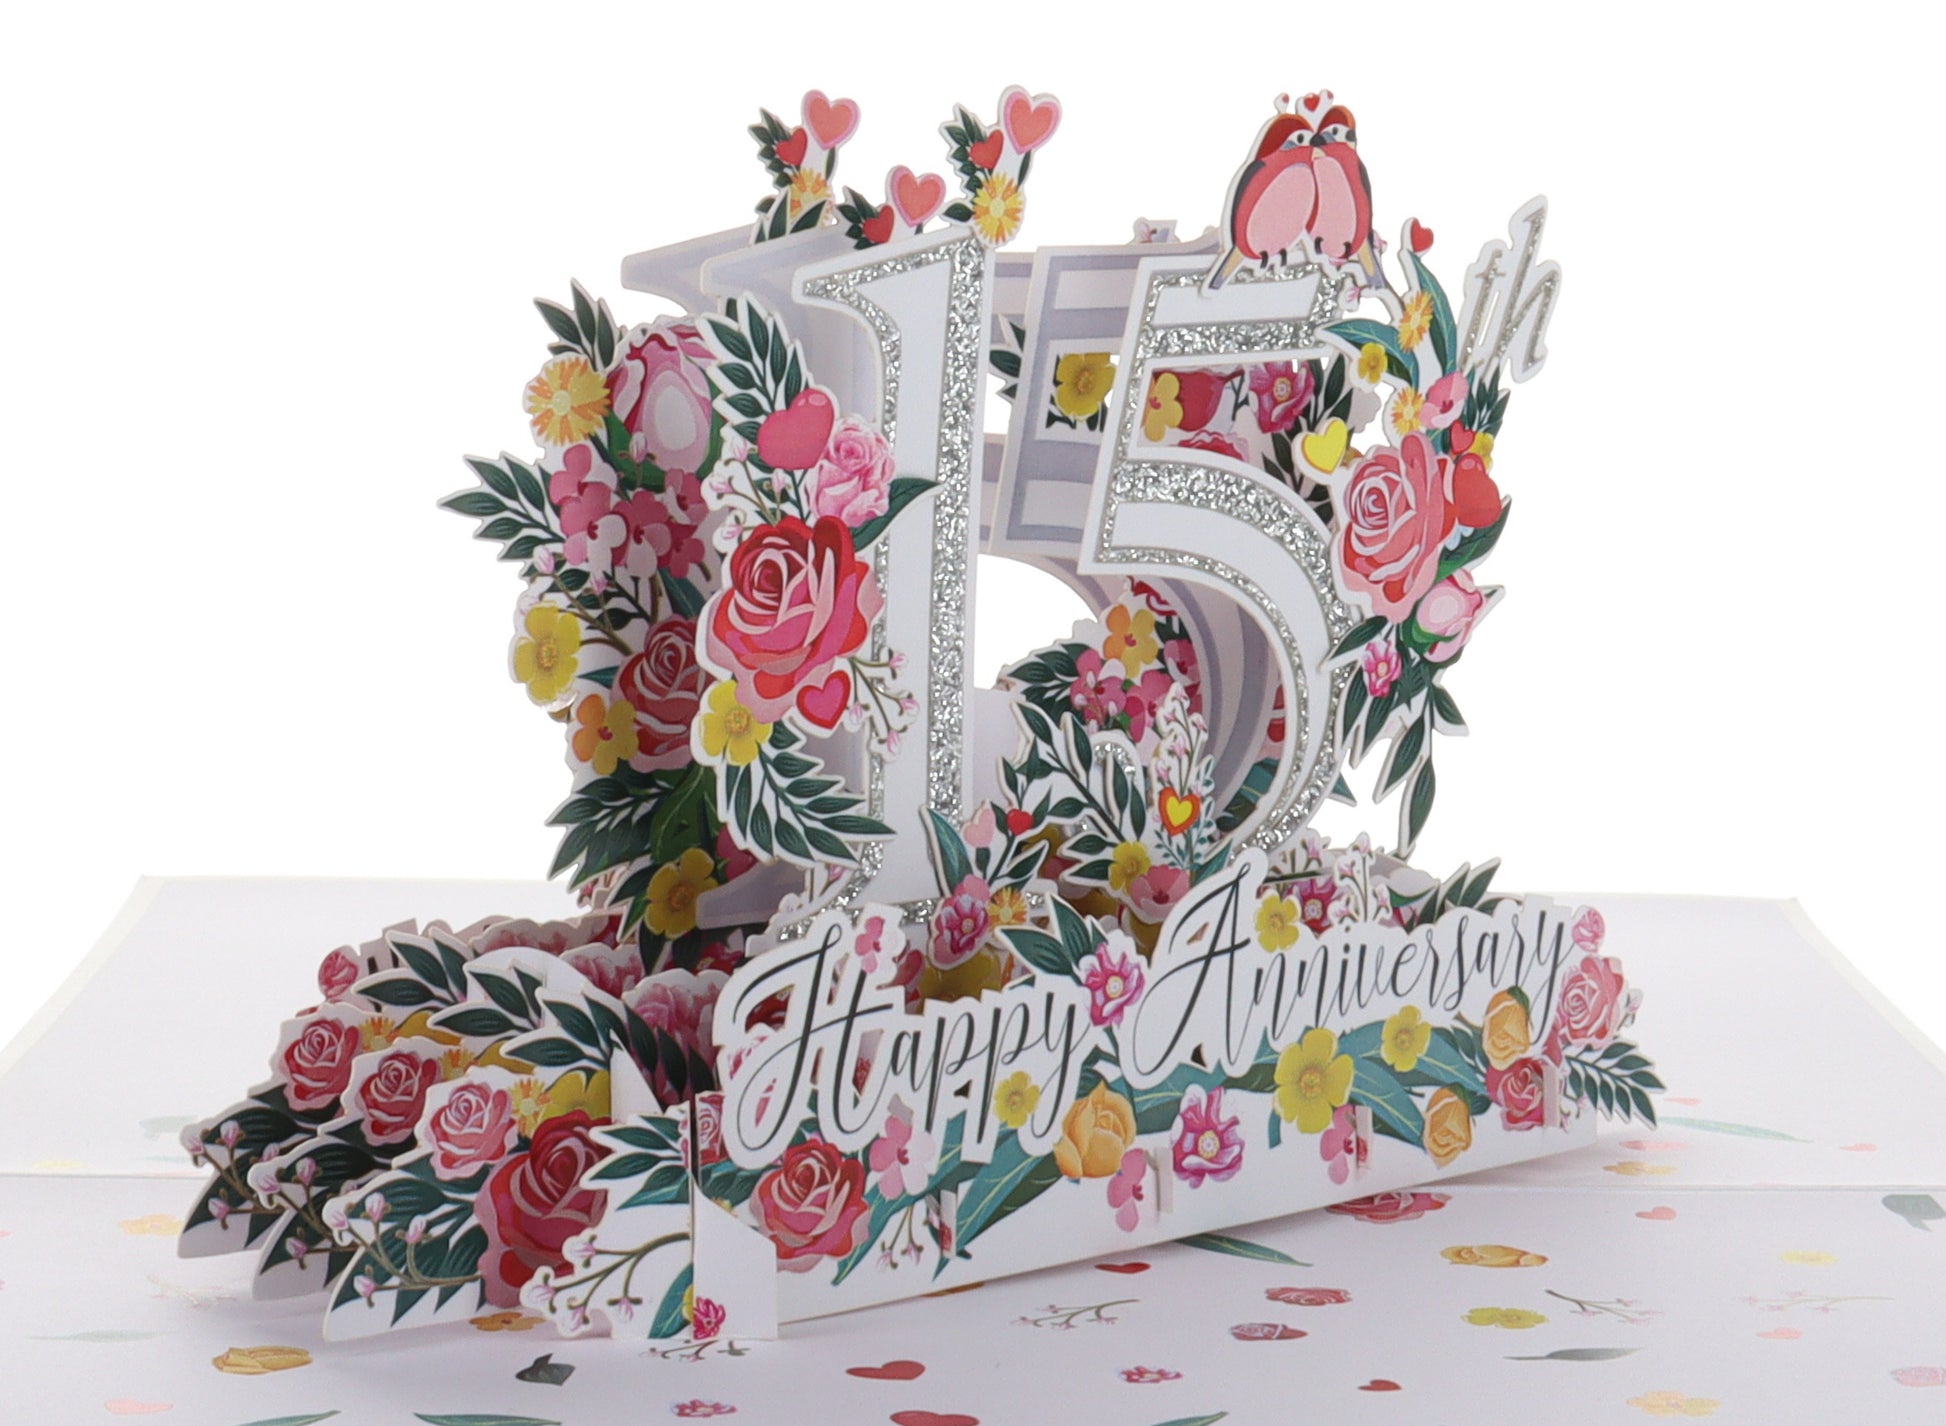 Happy 15th Milestone Anniversary 3D Pop Up Greeting Card - 15th Anniversary Being Together - 15th We - iGifts And Cards